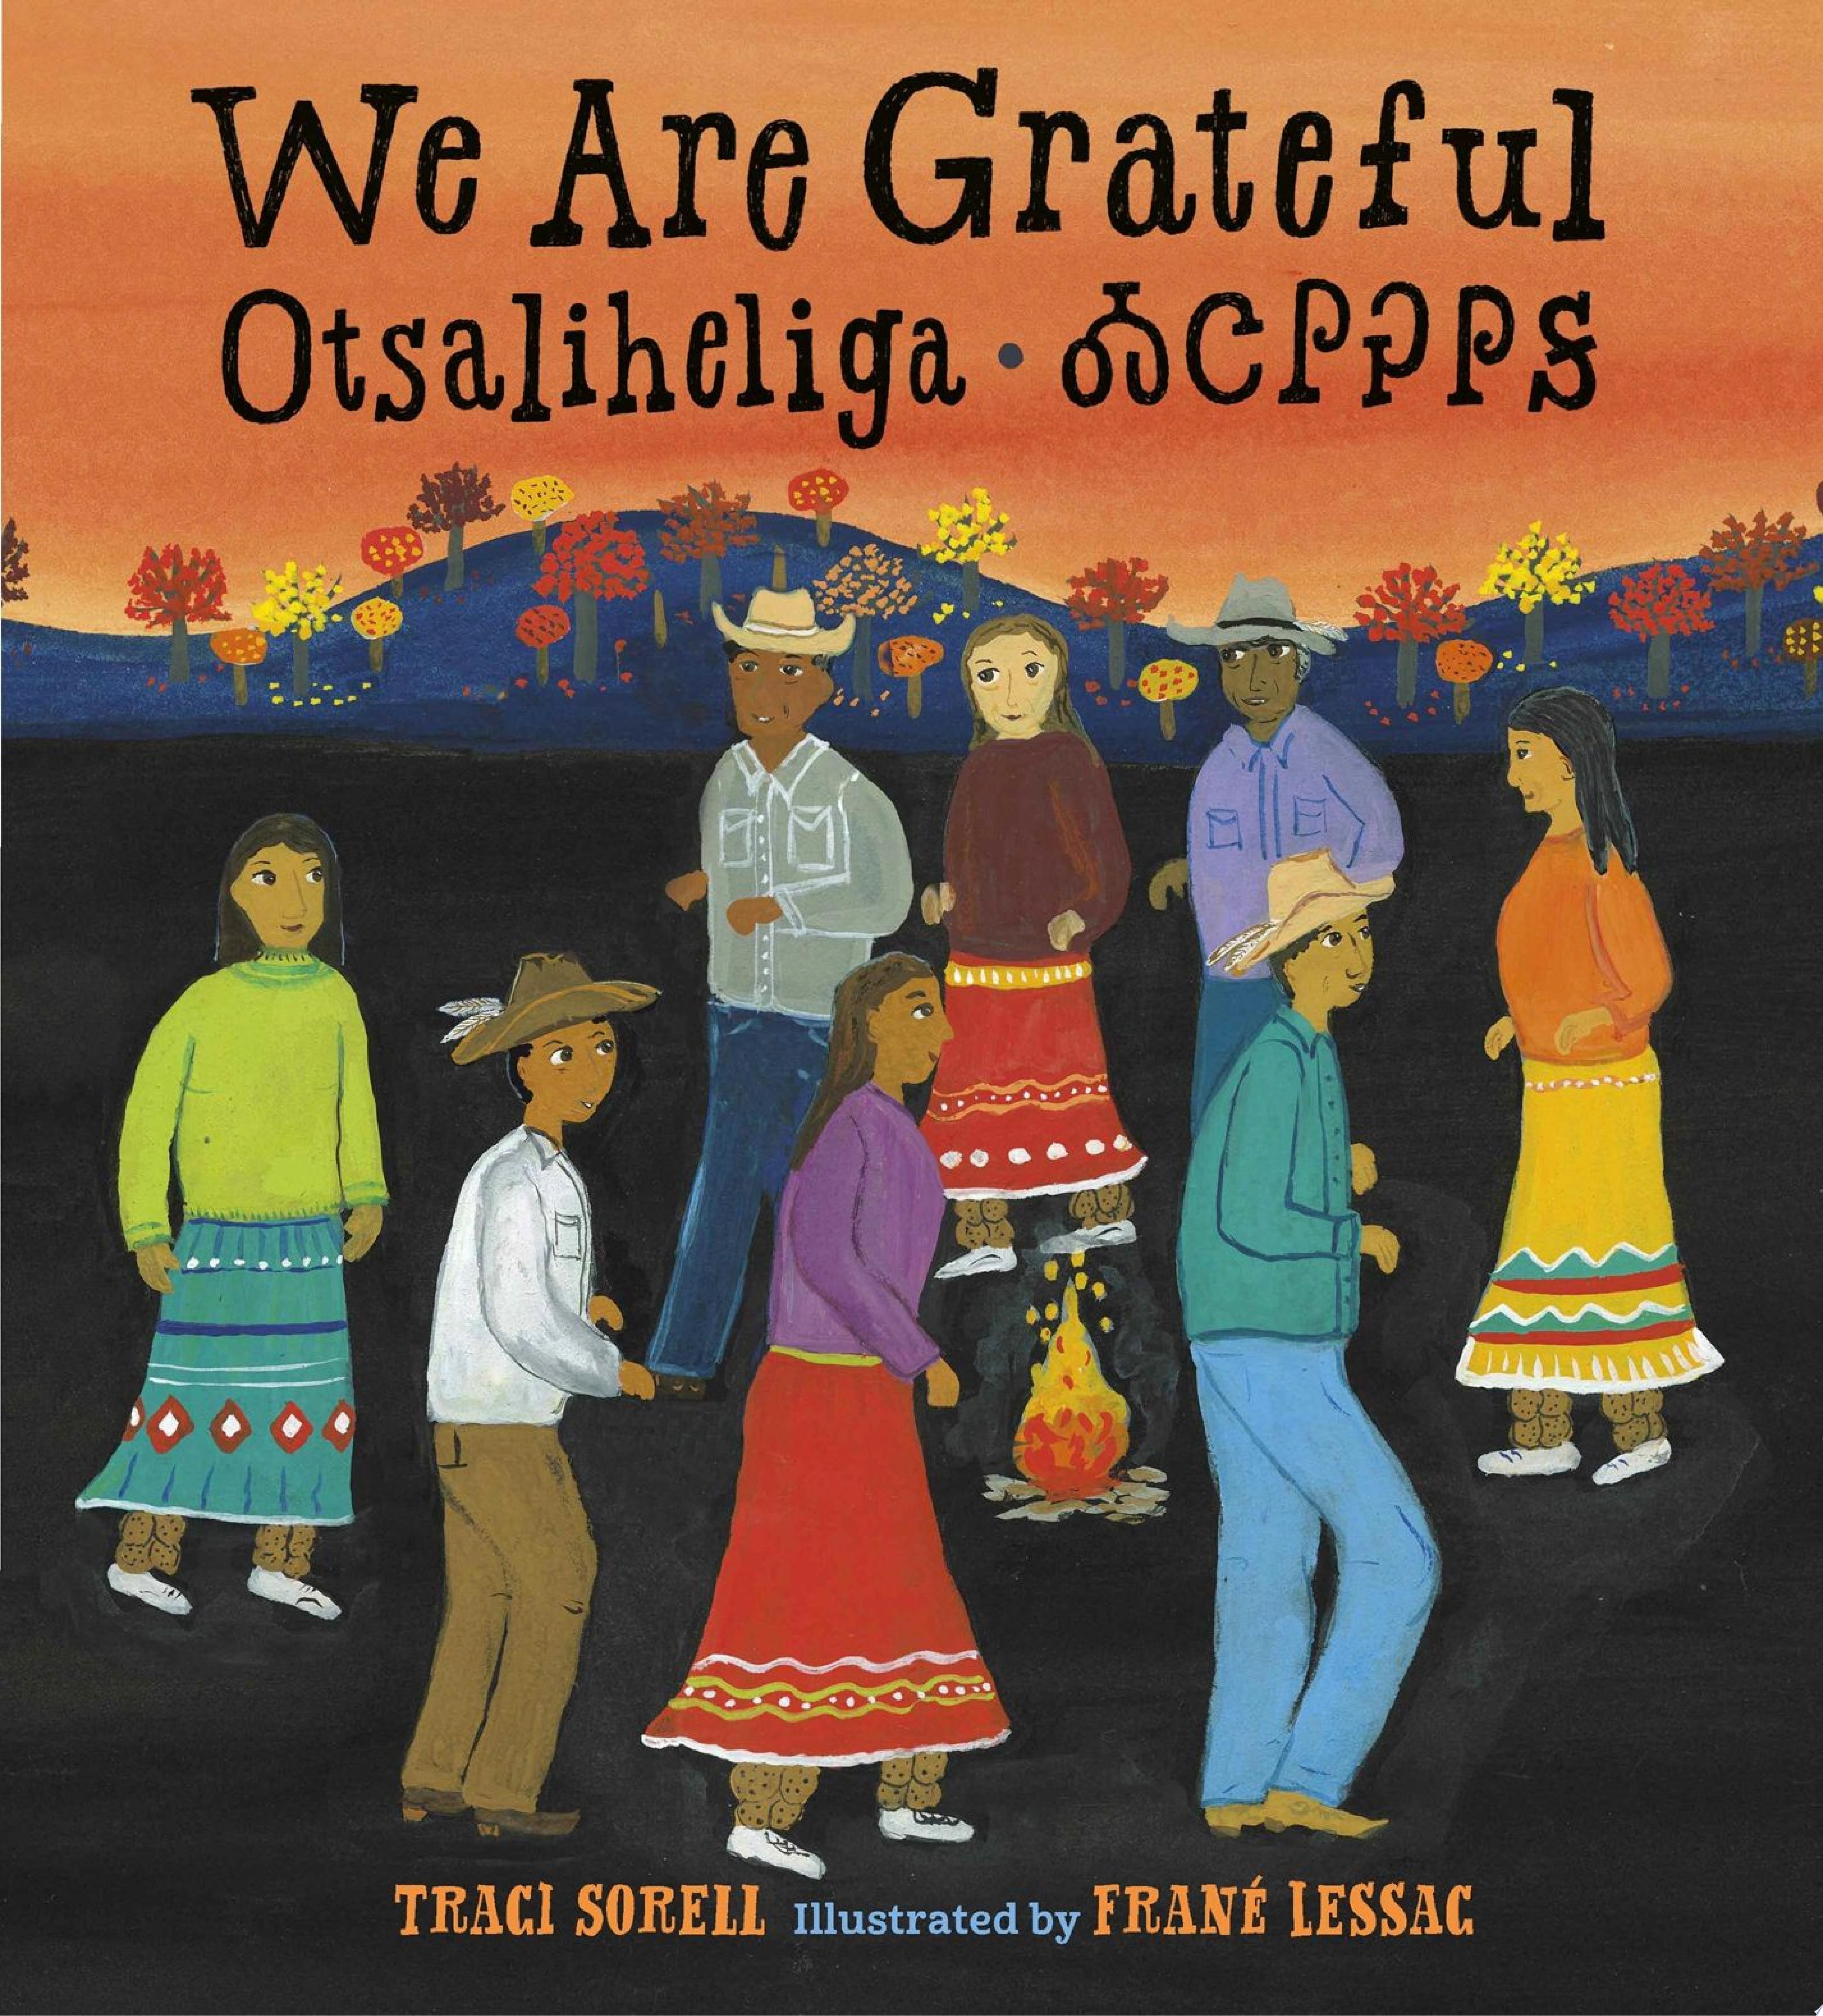 Image for "We Are Grateful"